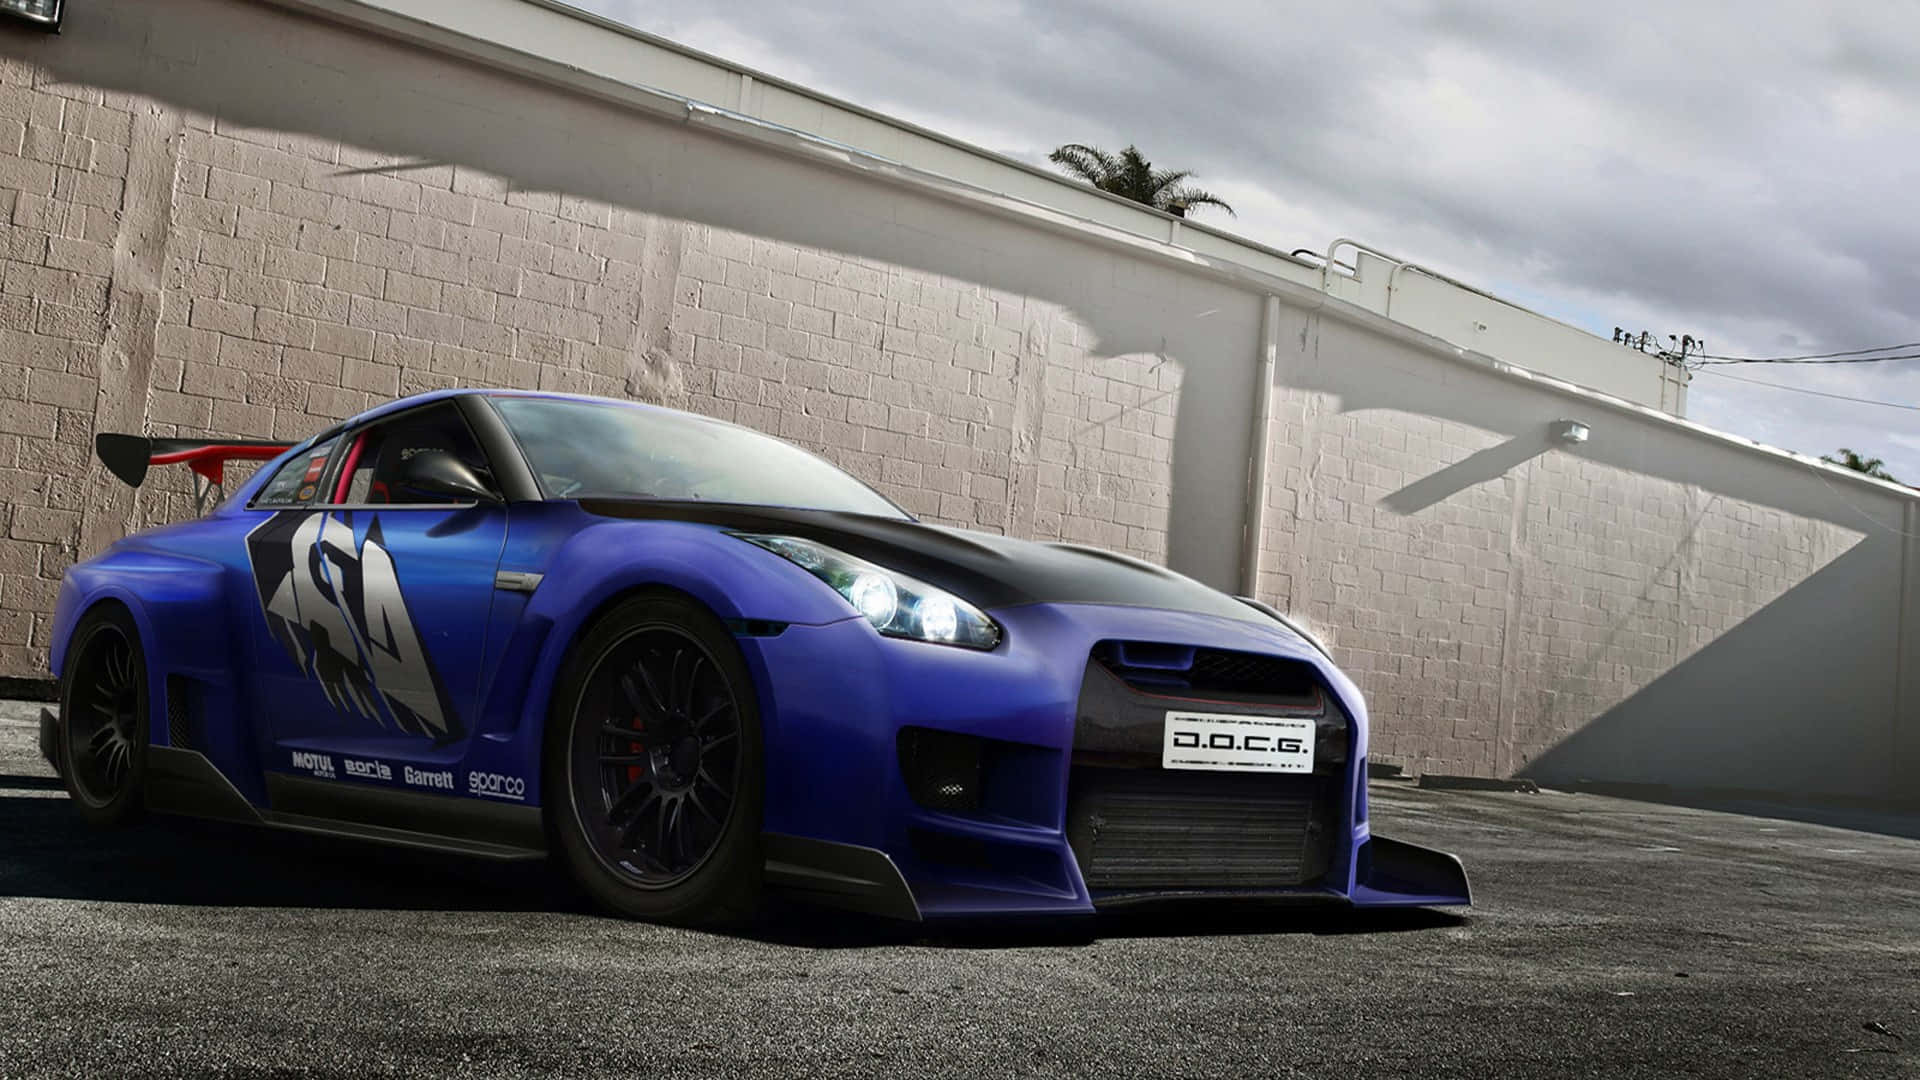 Nissan GT-R Quickly Forms a Bond With Its Drivers